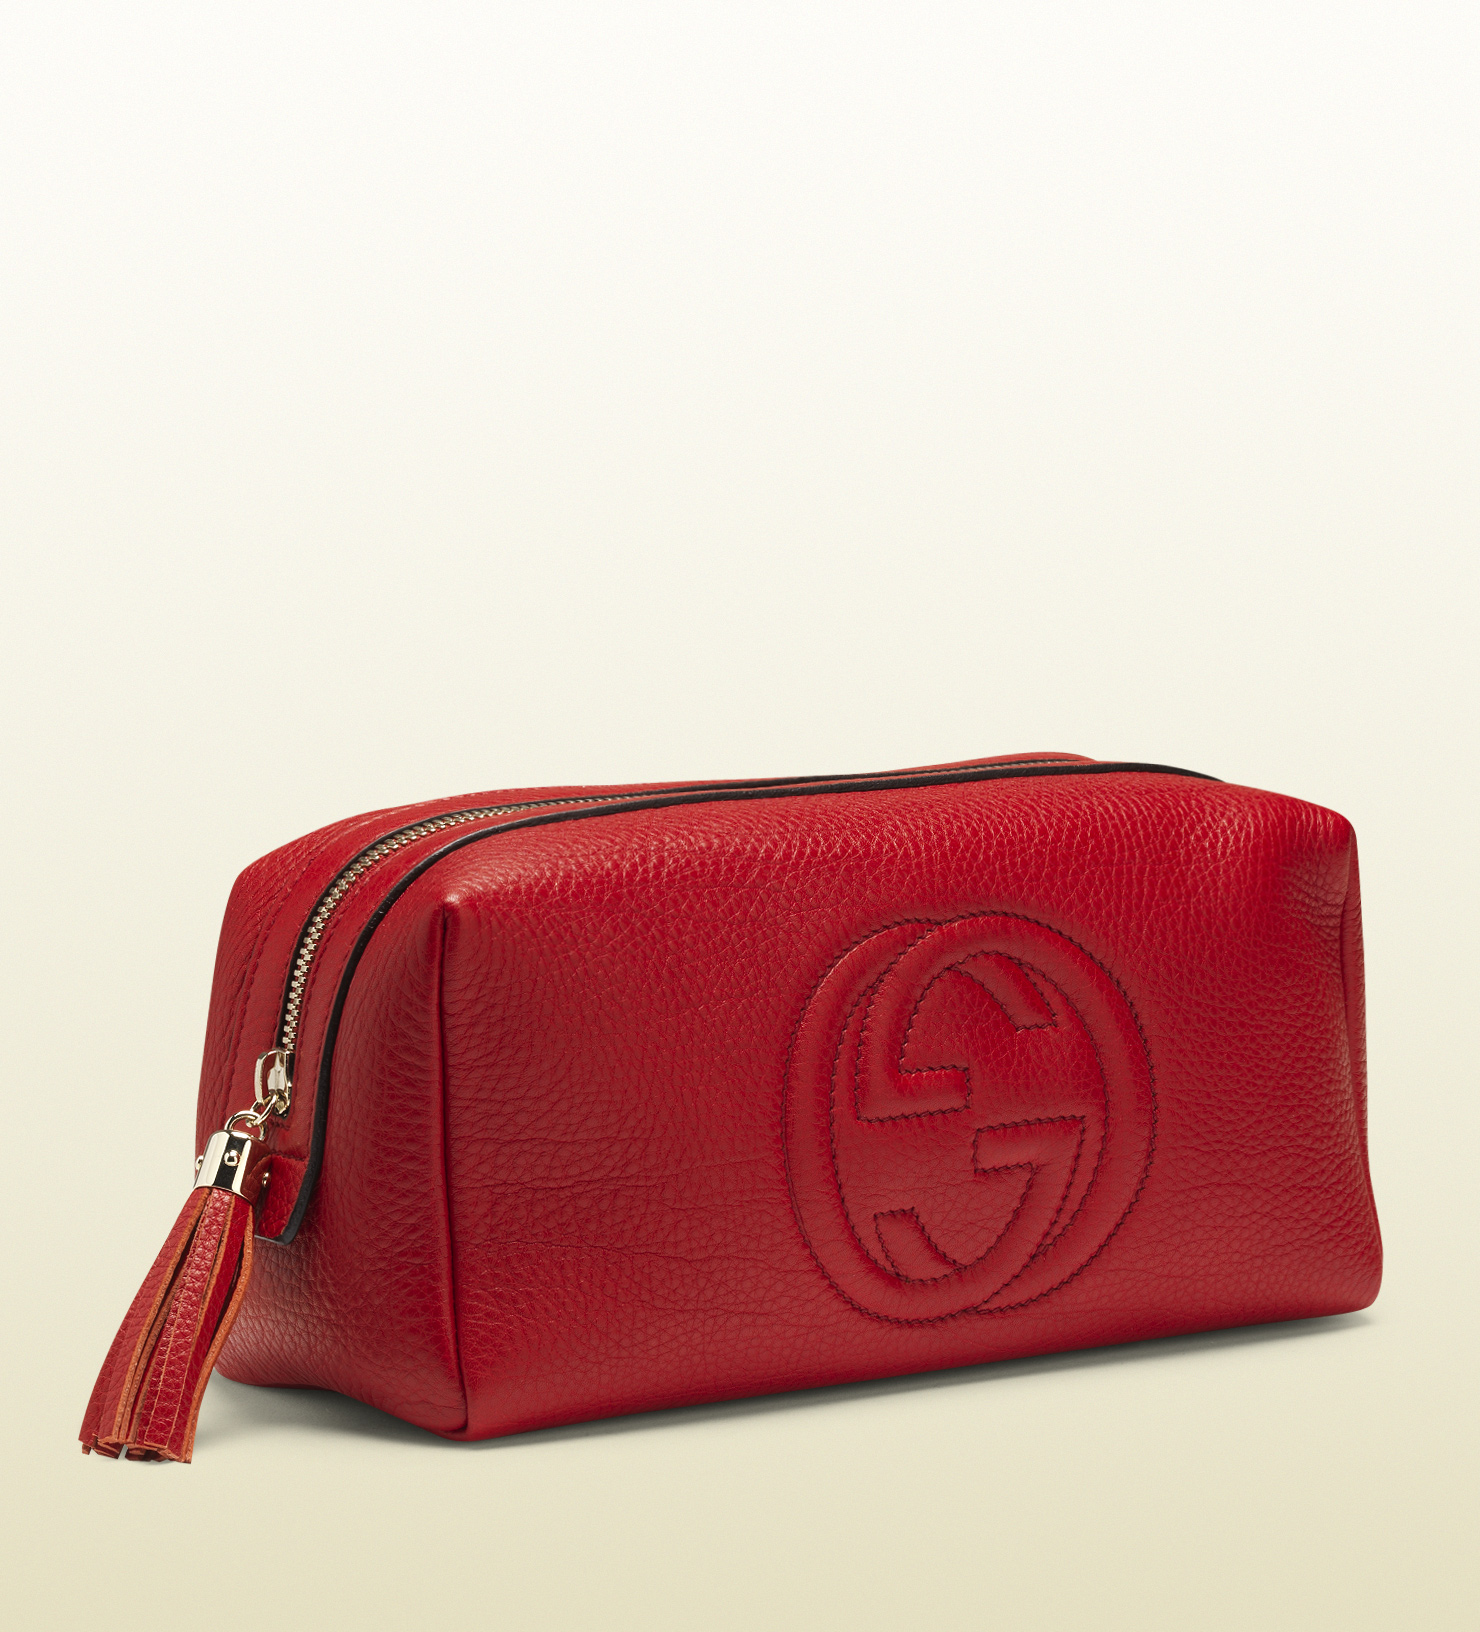 Lyst - Gucci Soho Large Red Leather Cosmetic Bag in Red